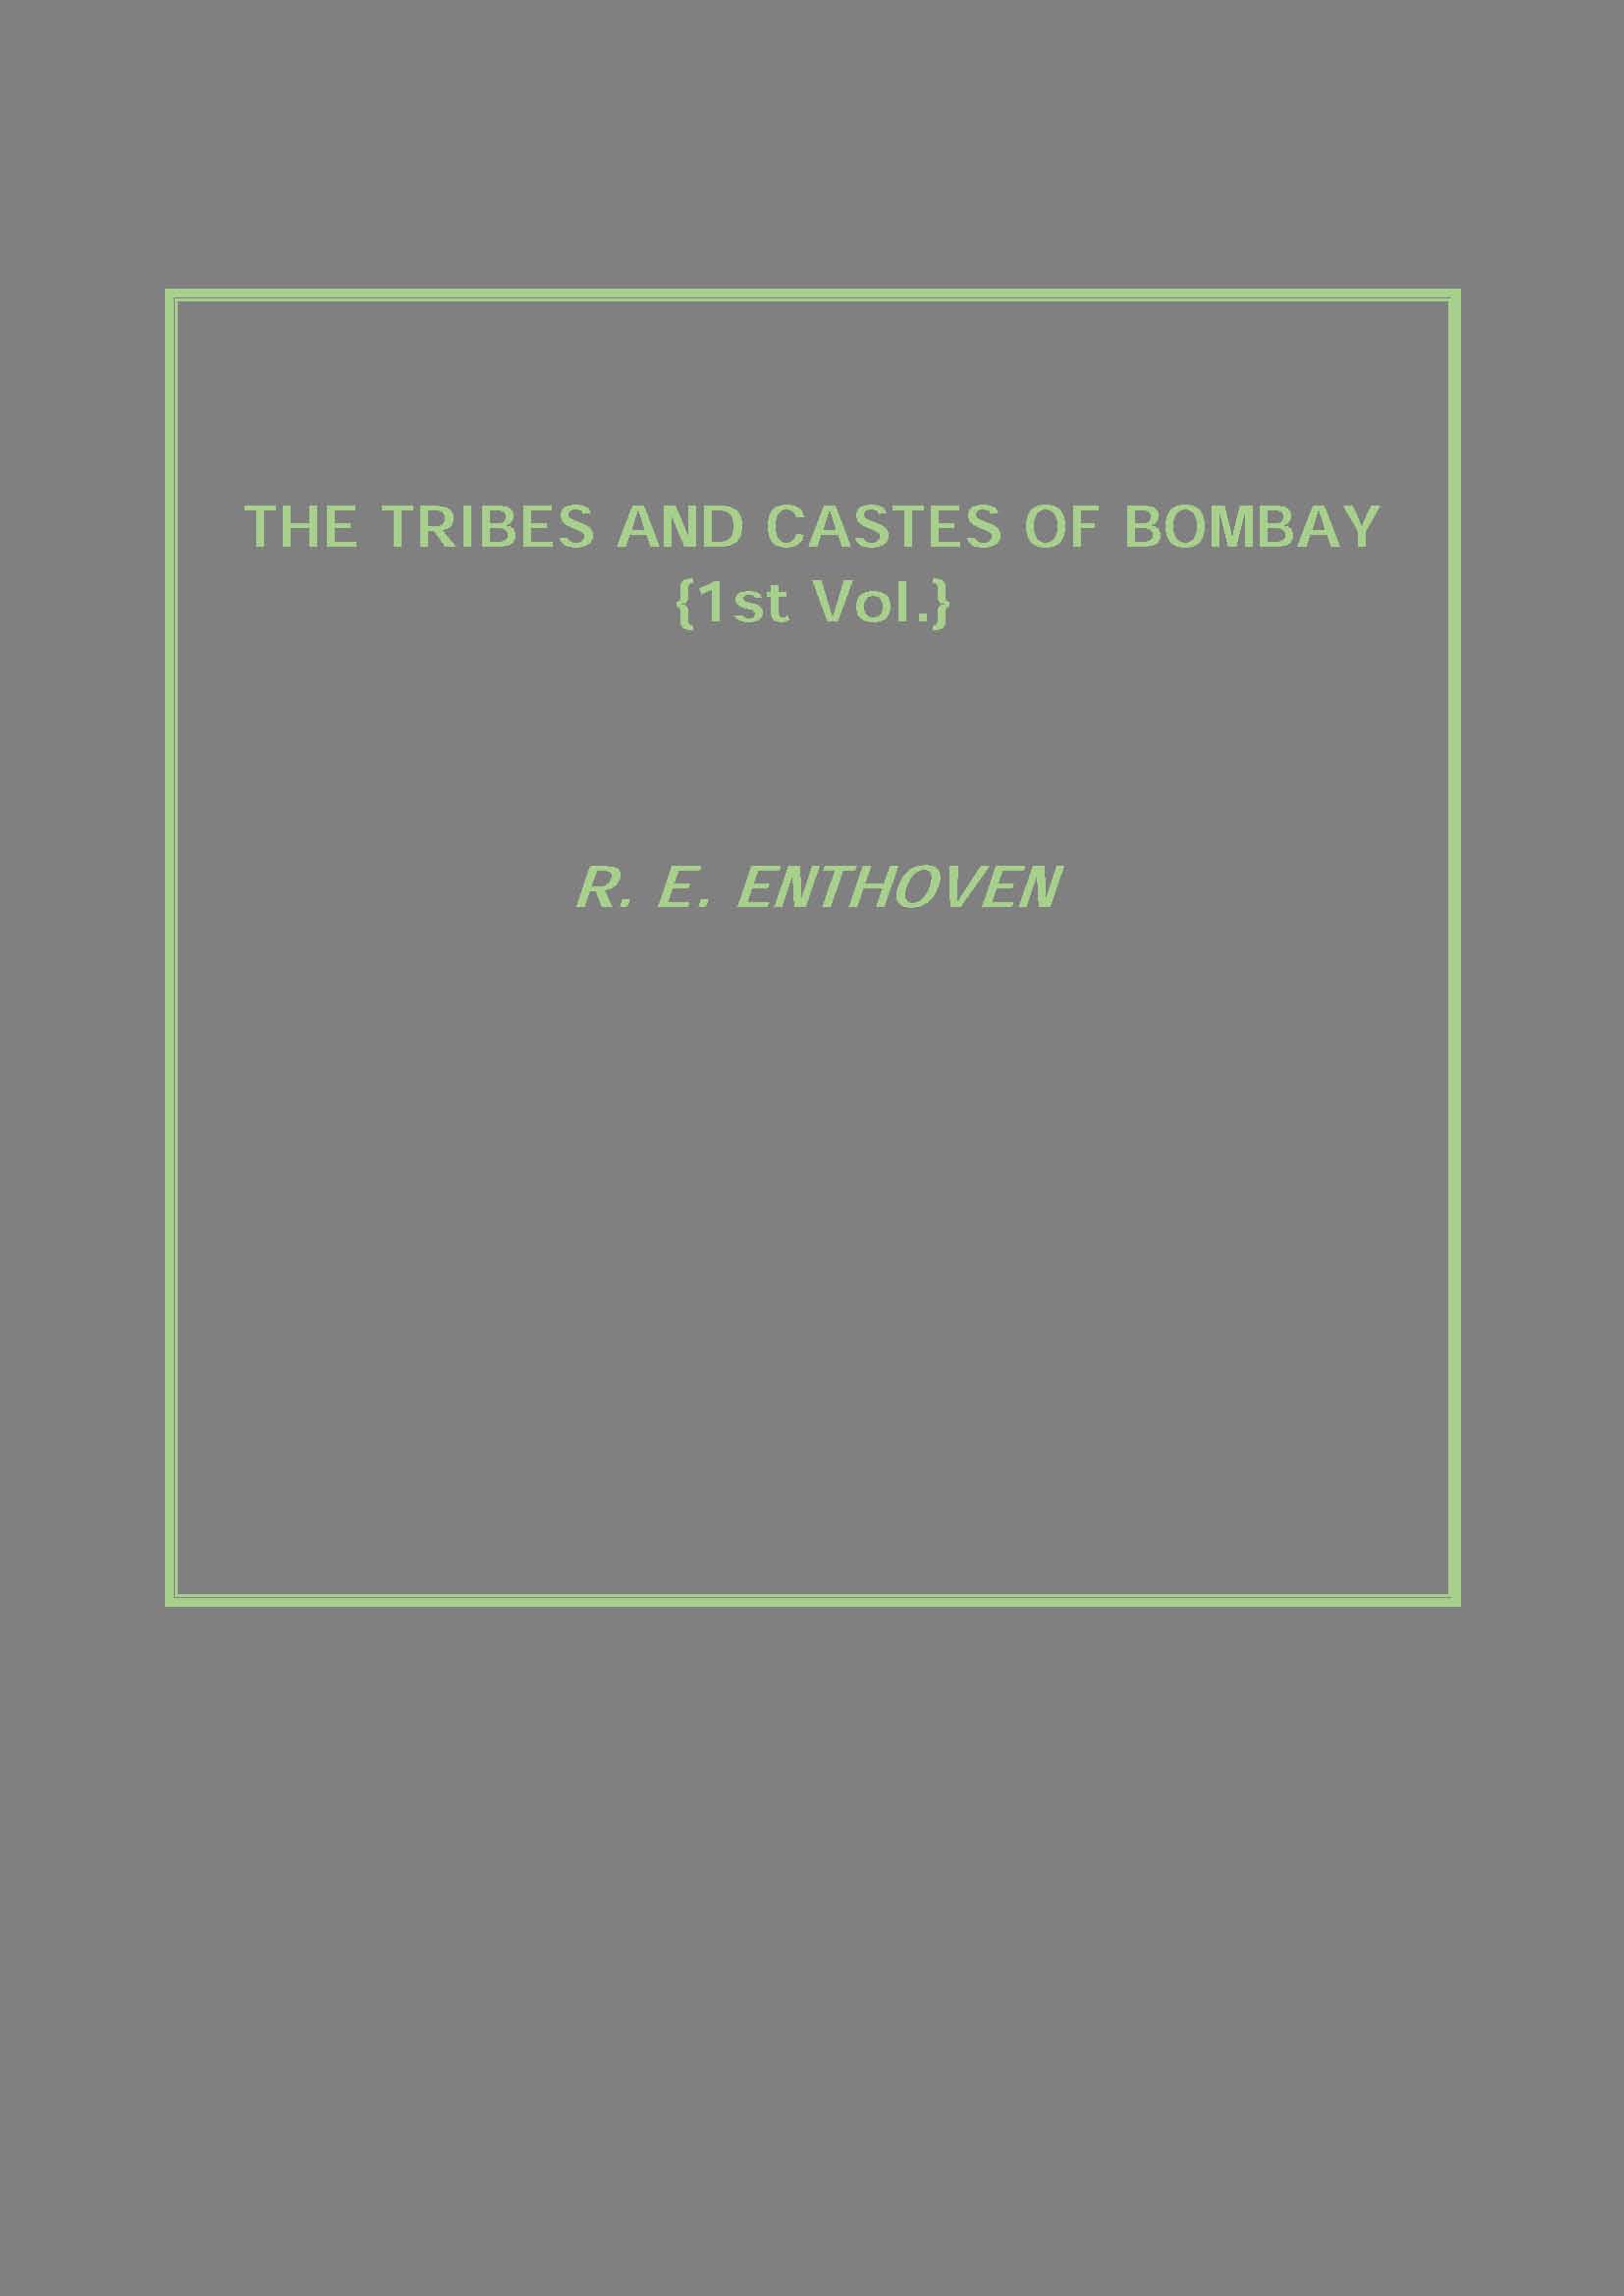 The Tribes and Castes of Bombay